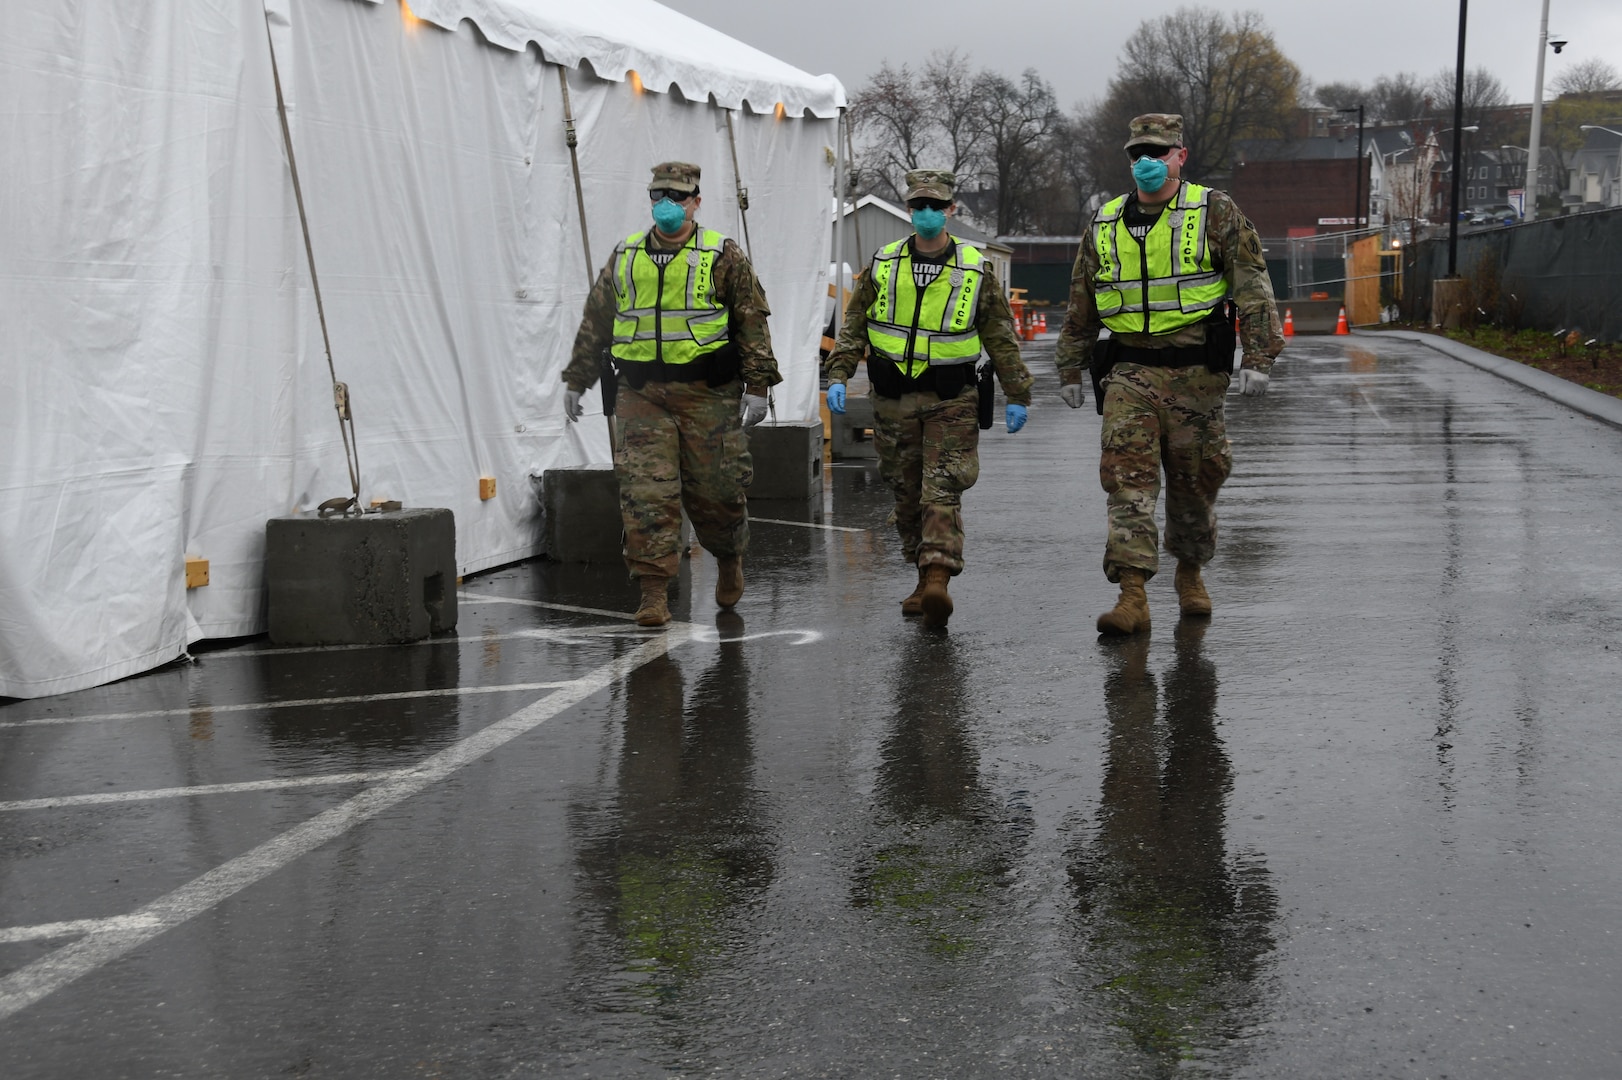 Security Forces and Military Police from the Massachusetts National Guard patrol a COVID-19 testing site for the homeless to protect supplies, patients and medical staff, Springfield, Massachusetts, April 21, 2020. Security Forces Airmen of the 104th Fighter Wing and Military Police Soldiers of the 211th Military Police Battalion, 747th Military Police Company, are working jointly as a quick reaction force in response to COVID-19.